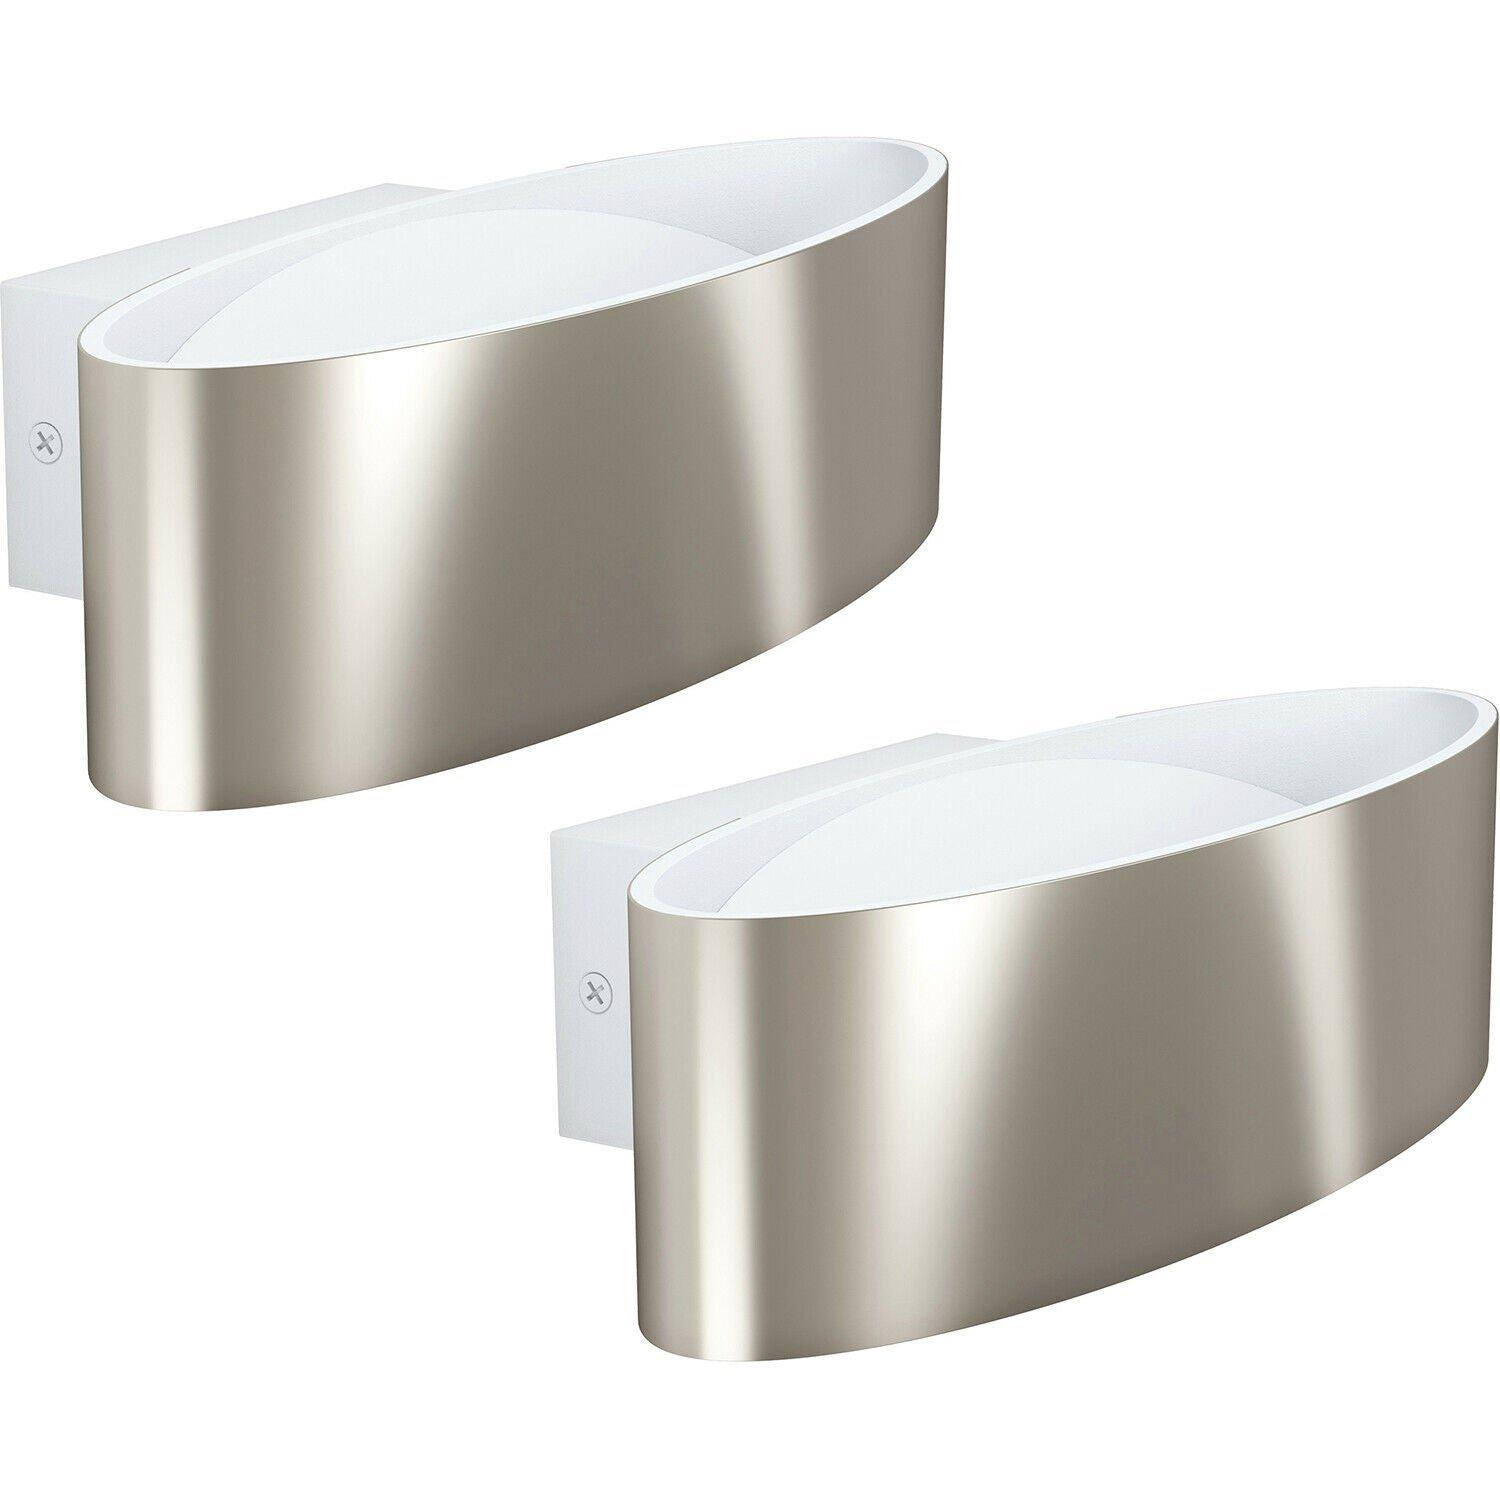 2 PACK Wall Light Colour White Satin Nickel Shade Transparent Plastic LED 10W